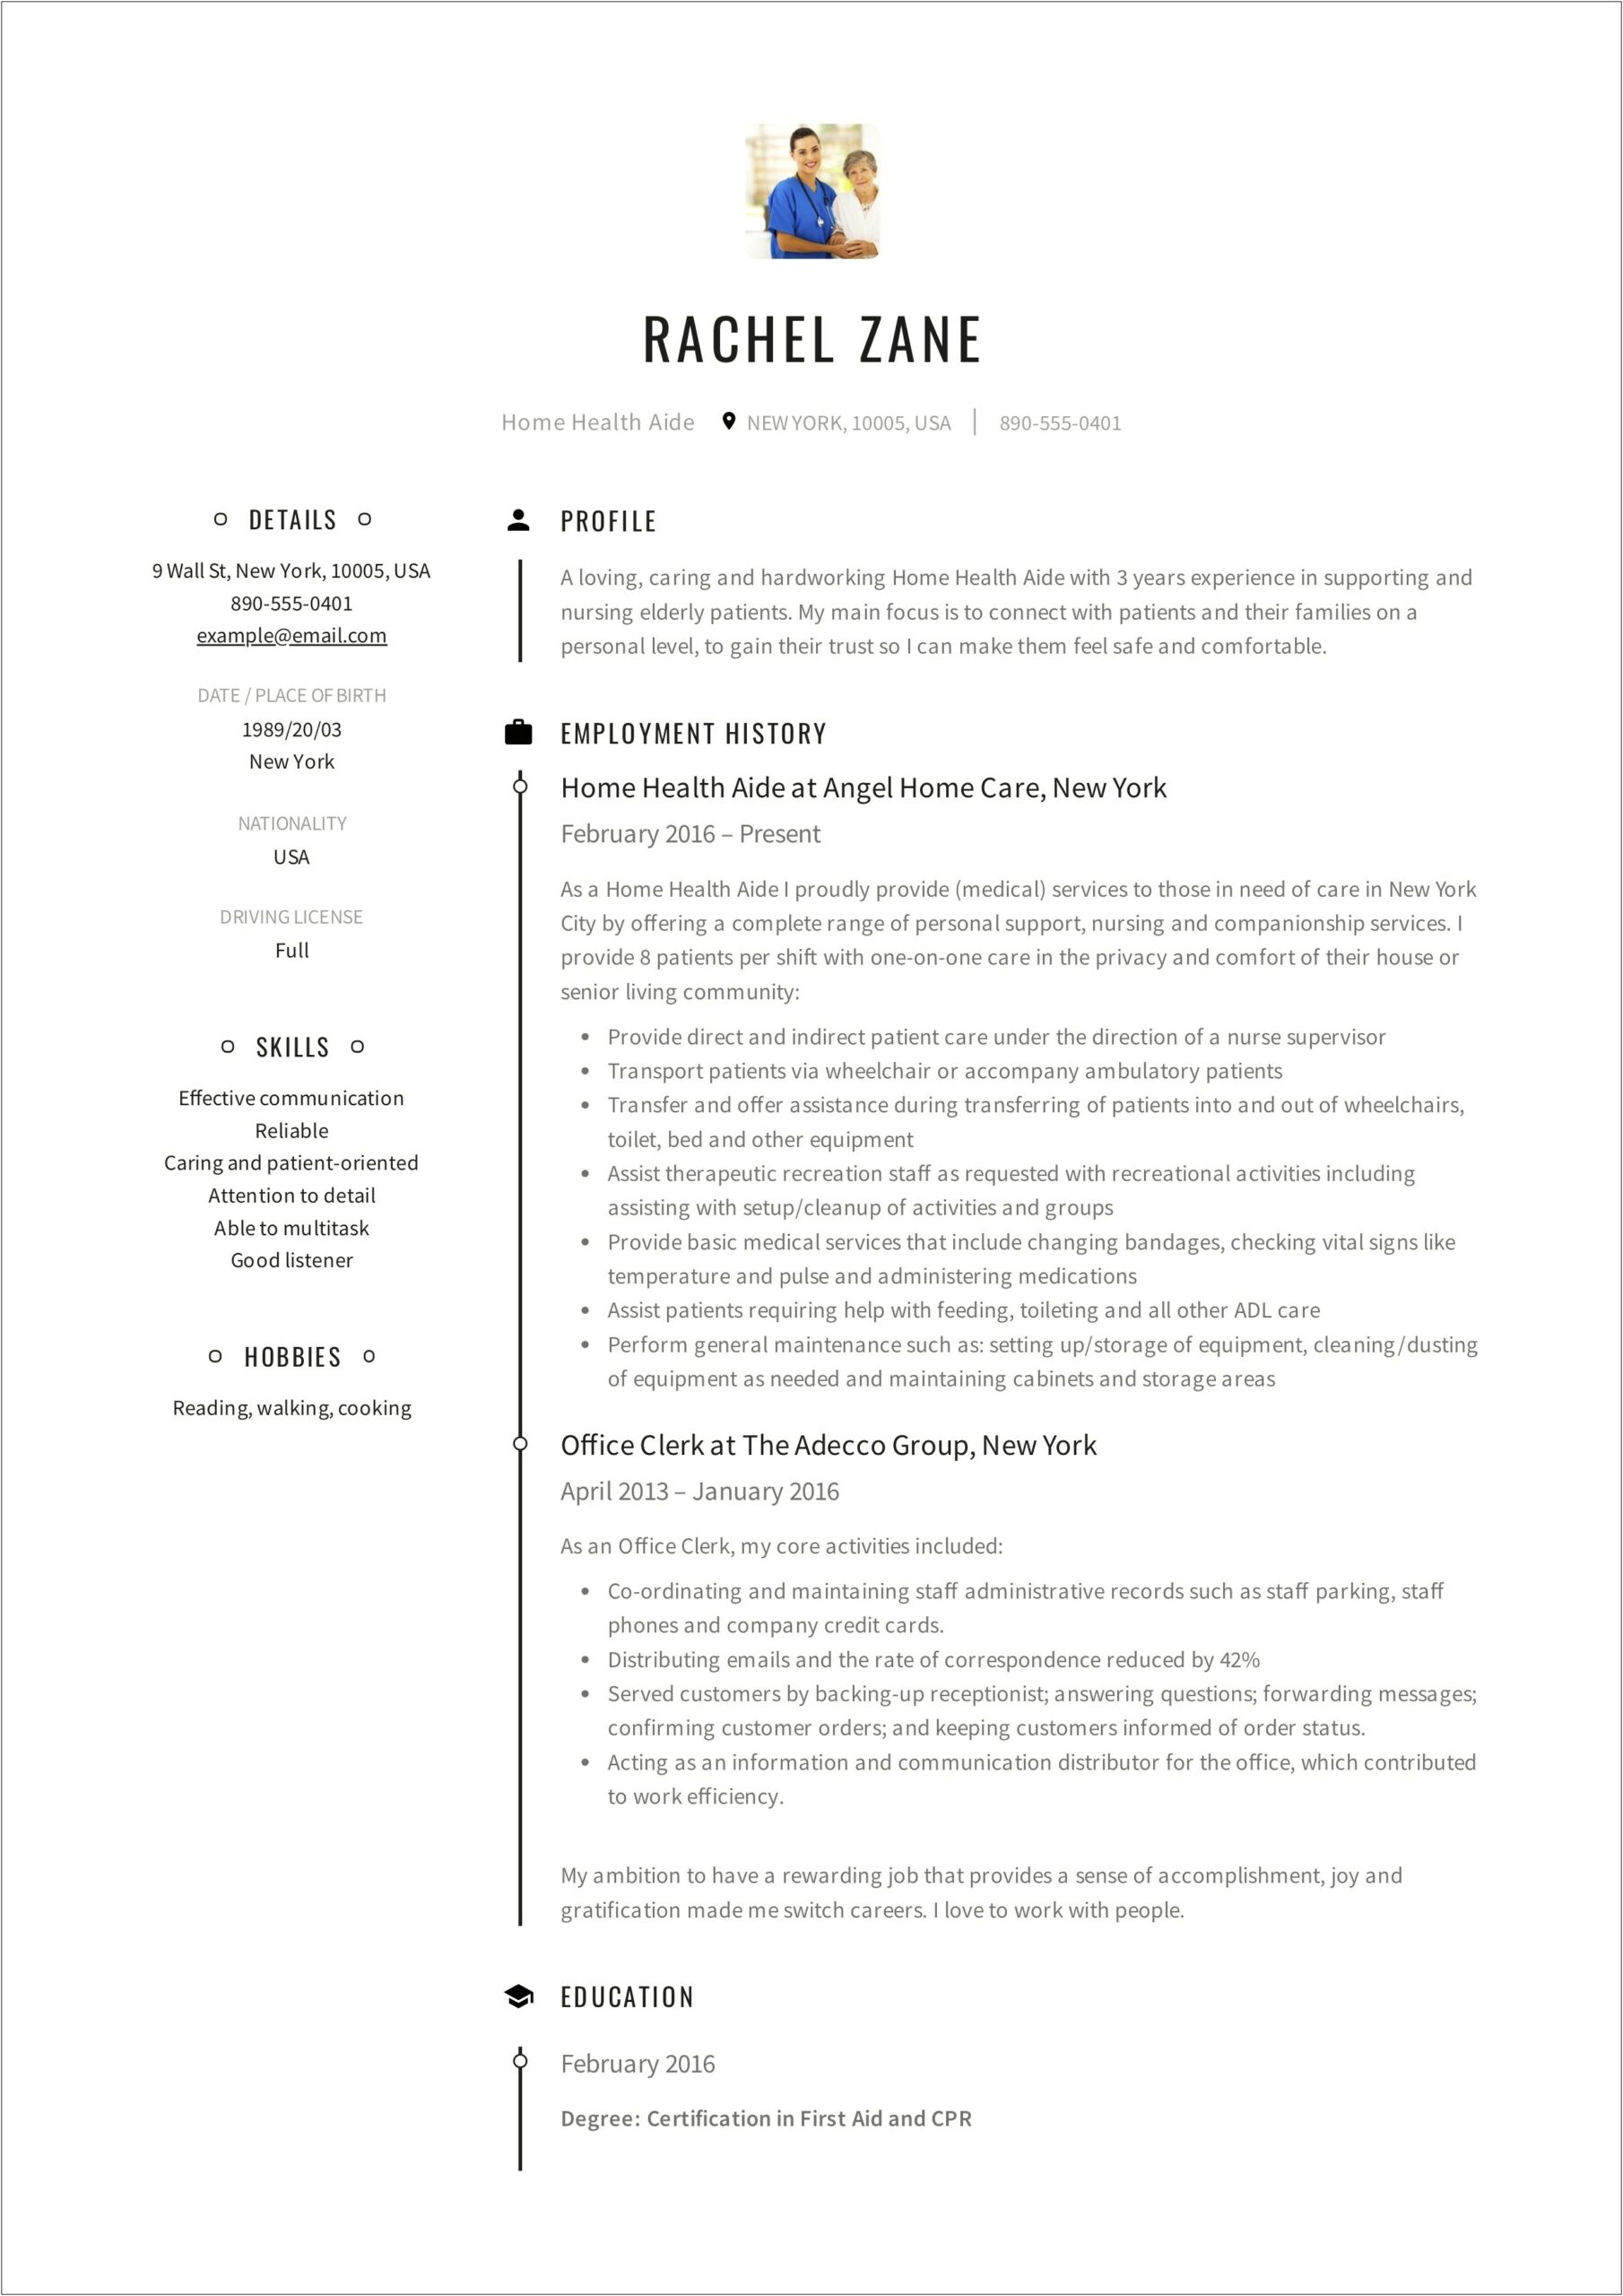 Home Health Care Resume Objective